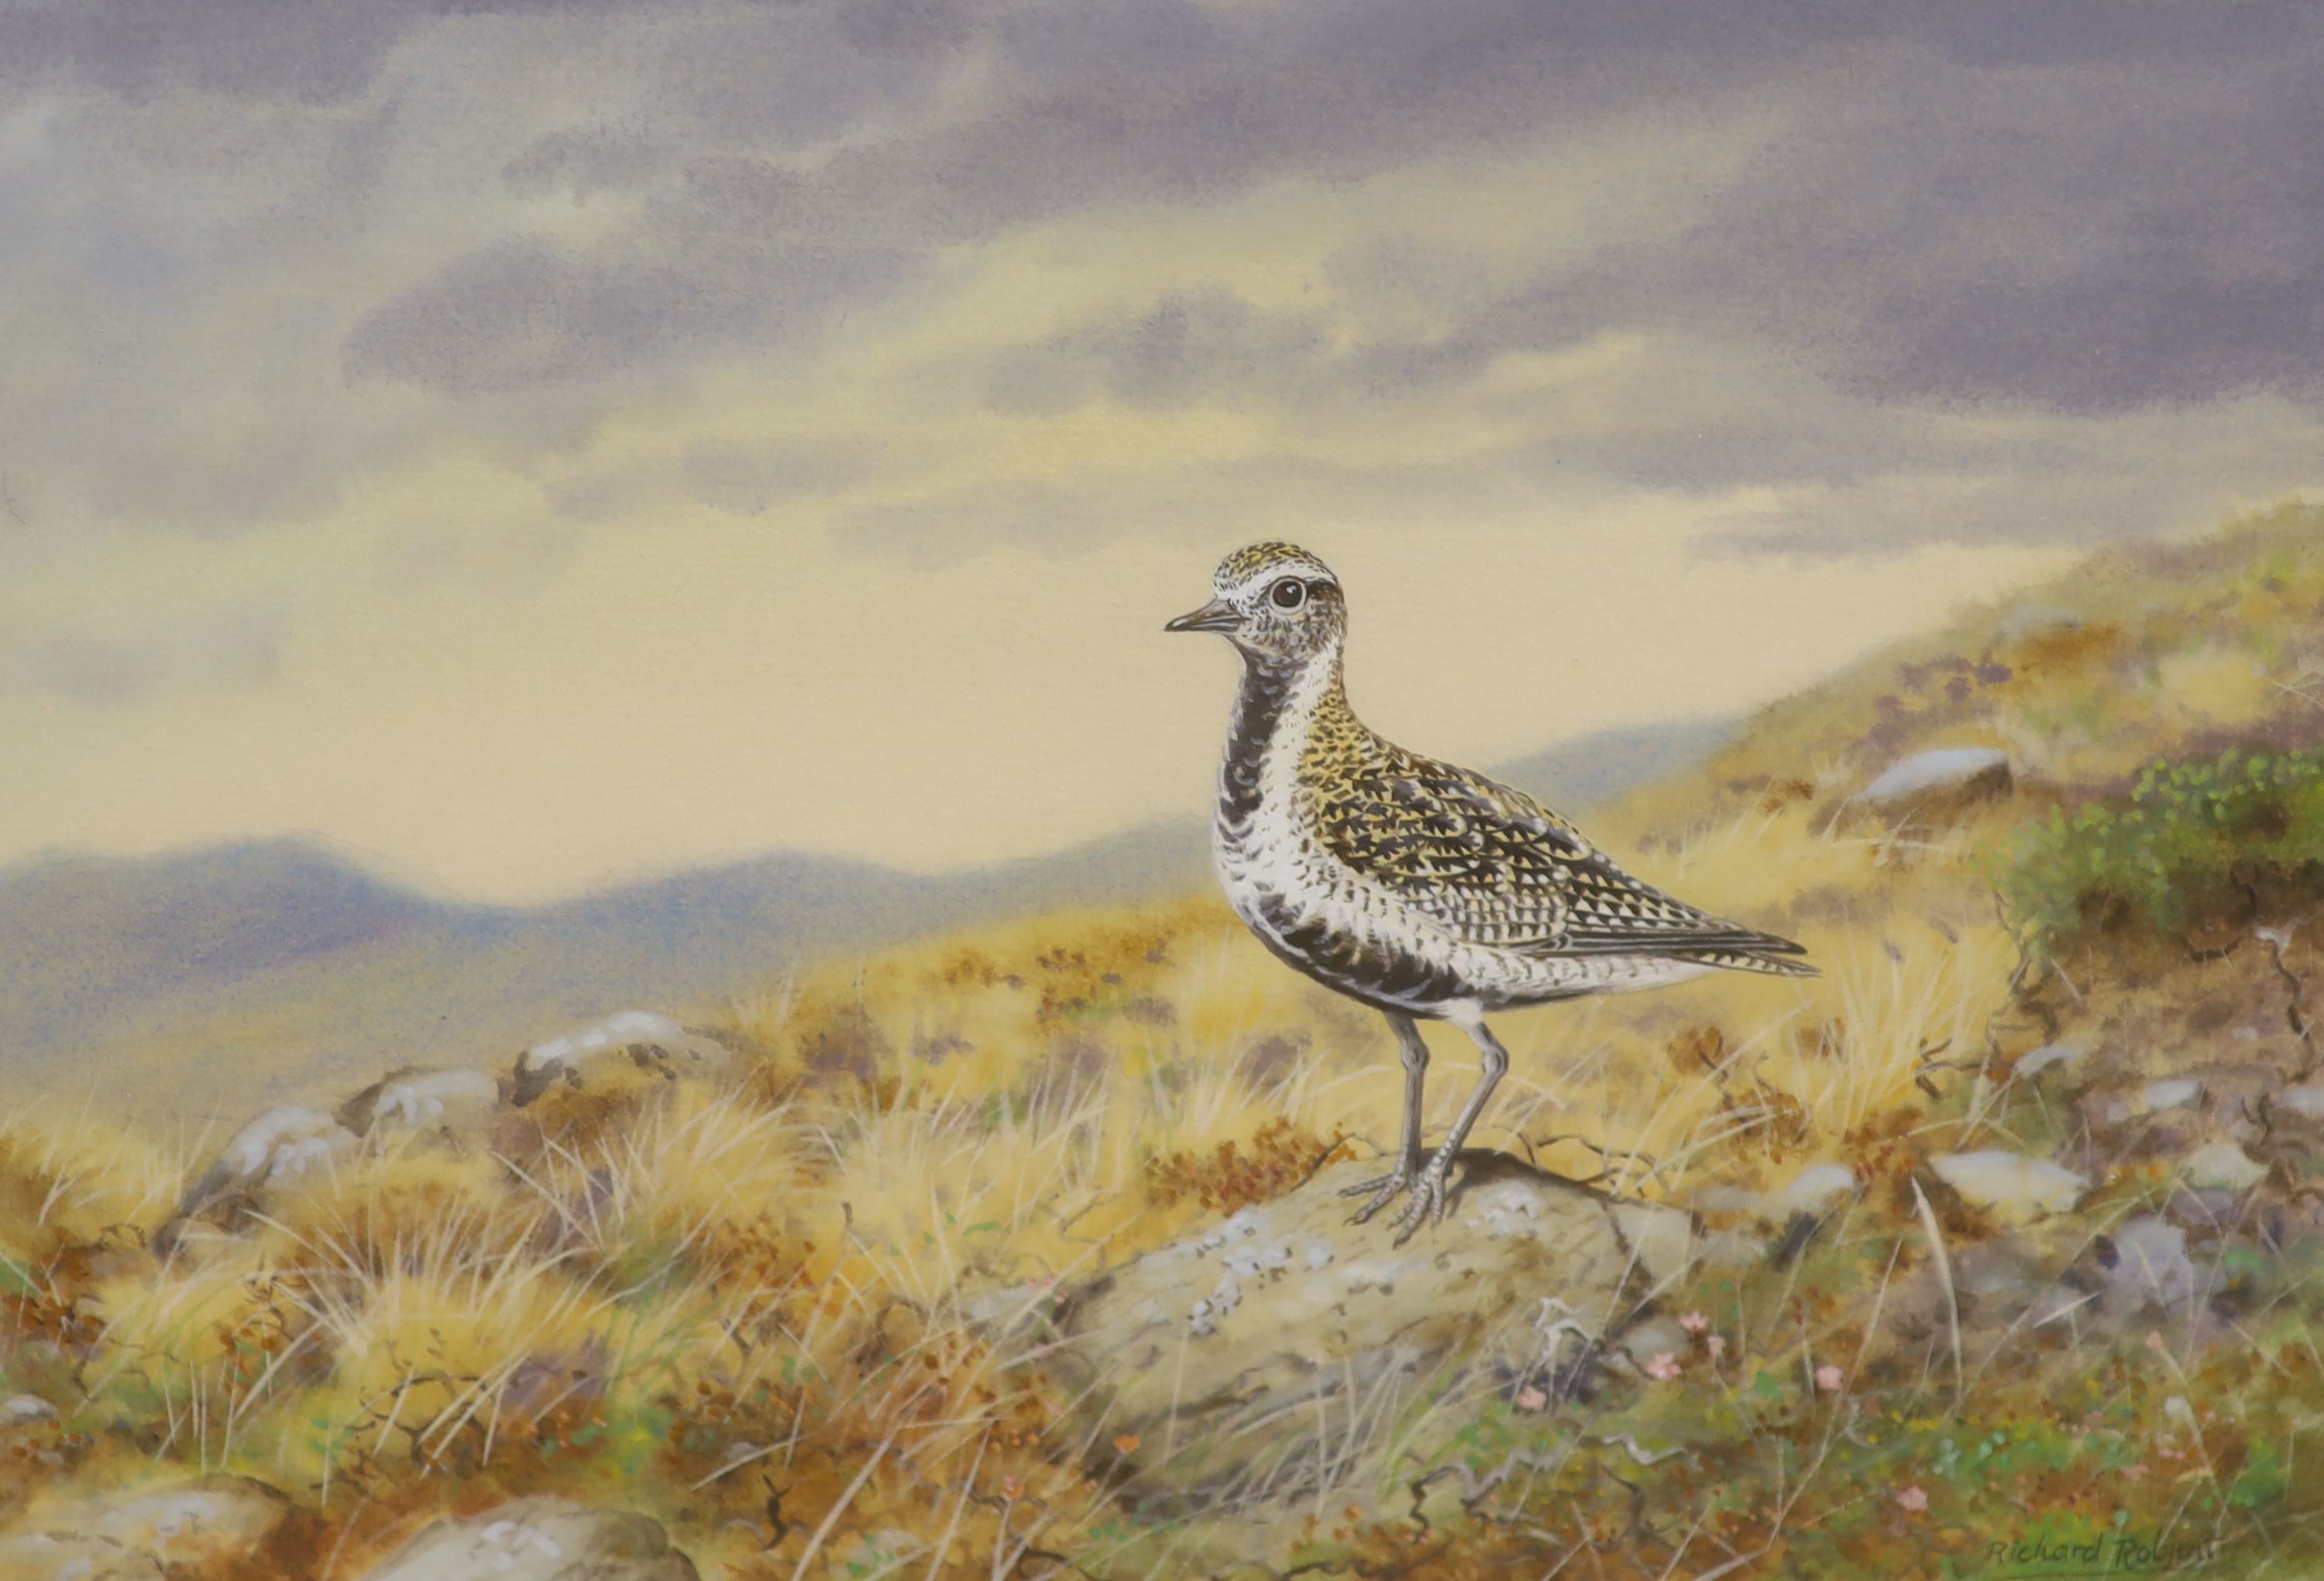 Richard Robjent (b. 1937), watercolour and gouache on paper, Moorland landscape with Golden Plover, signed, 25.5 x 35cm